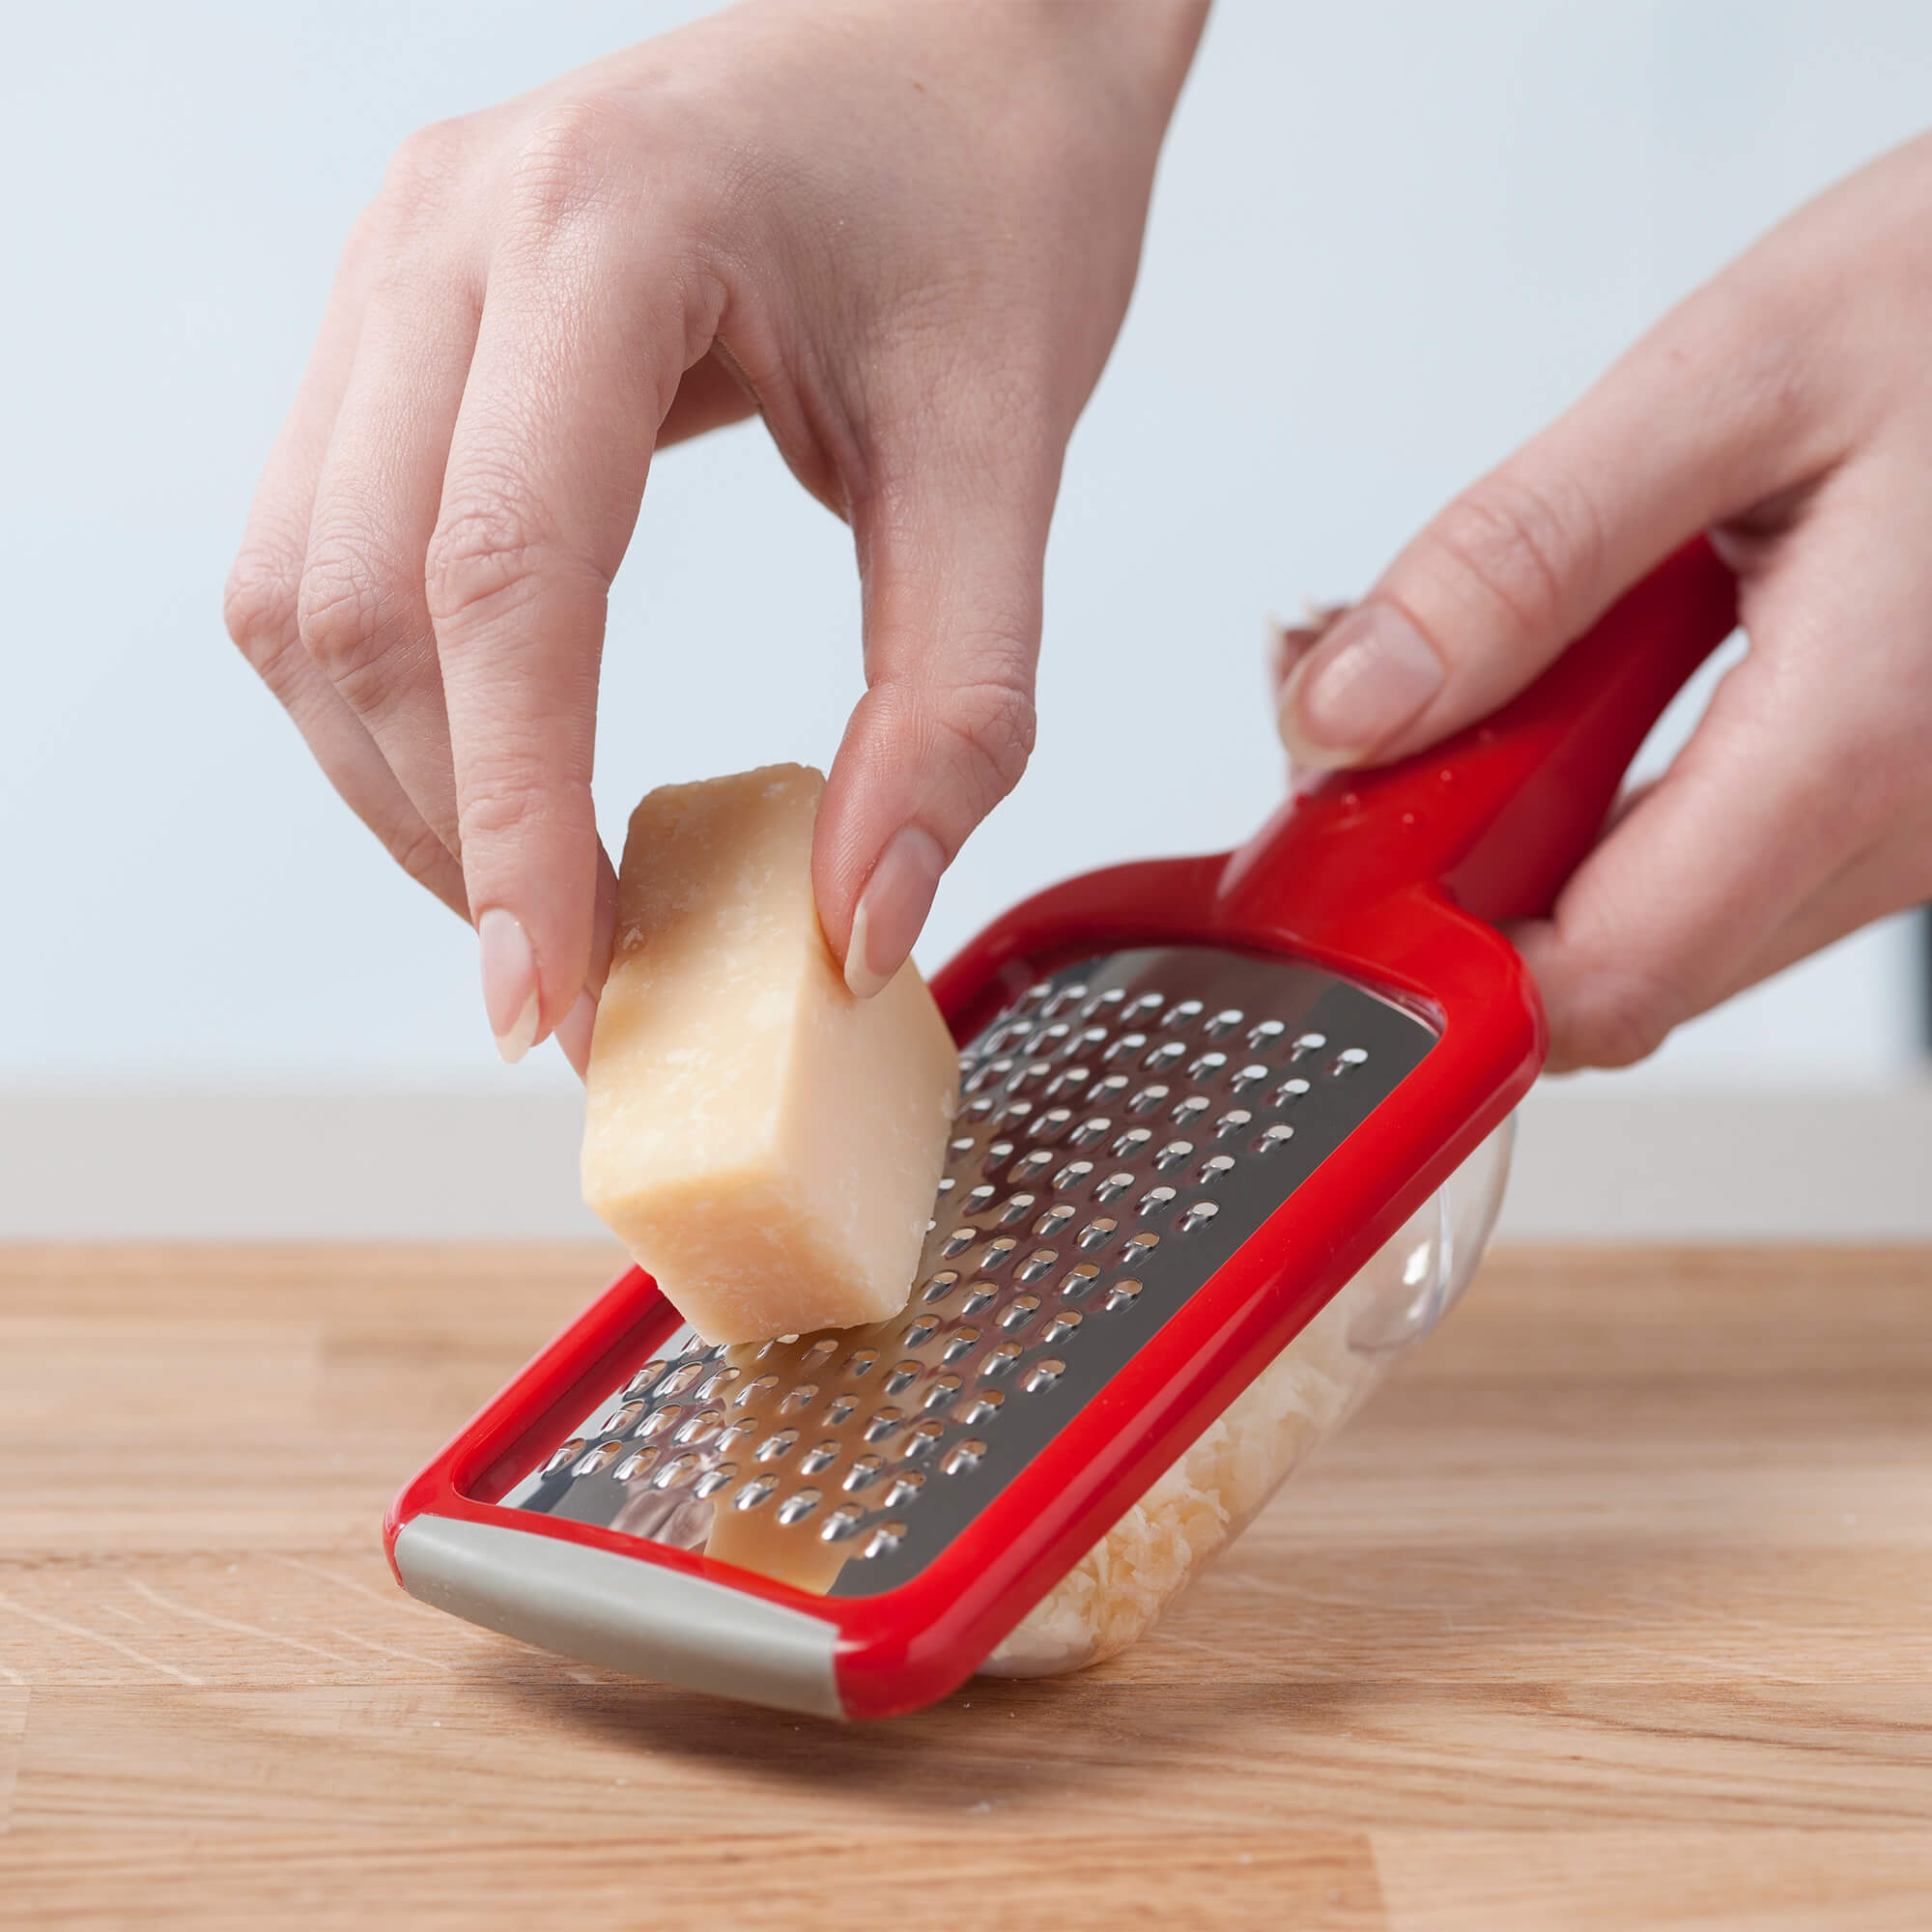 Zeal Mini Fine Grater grating cheese